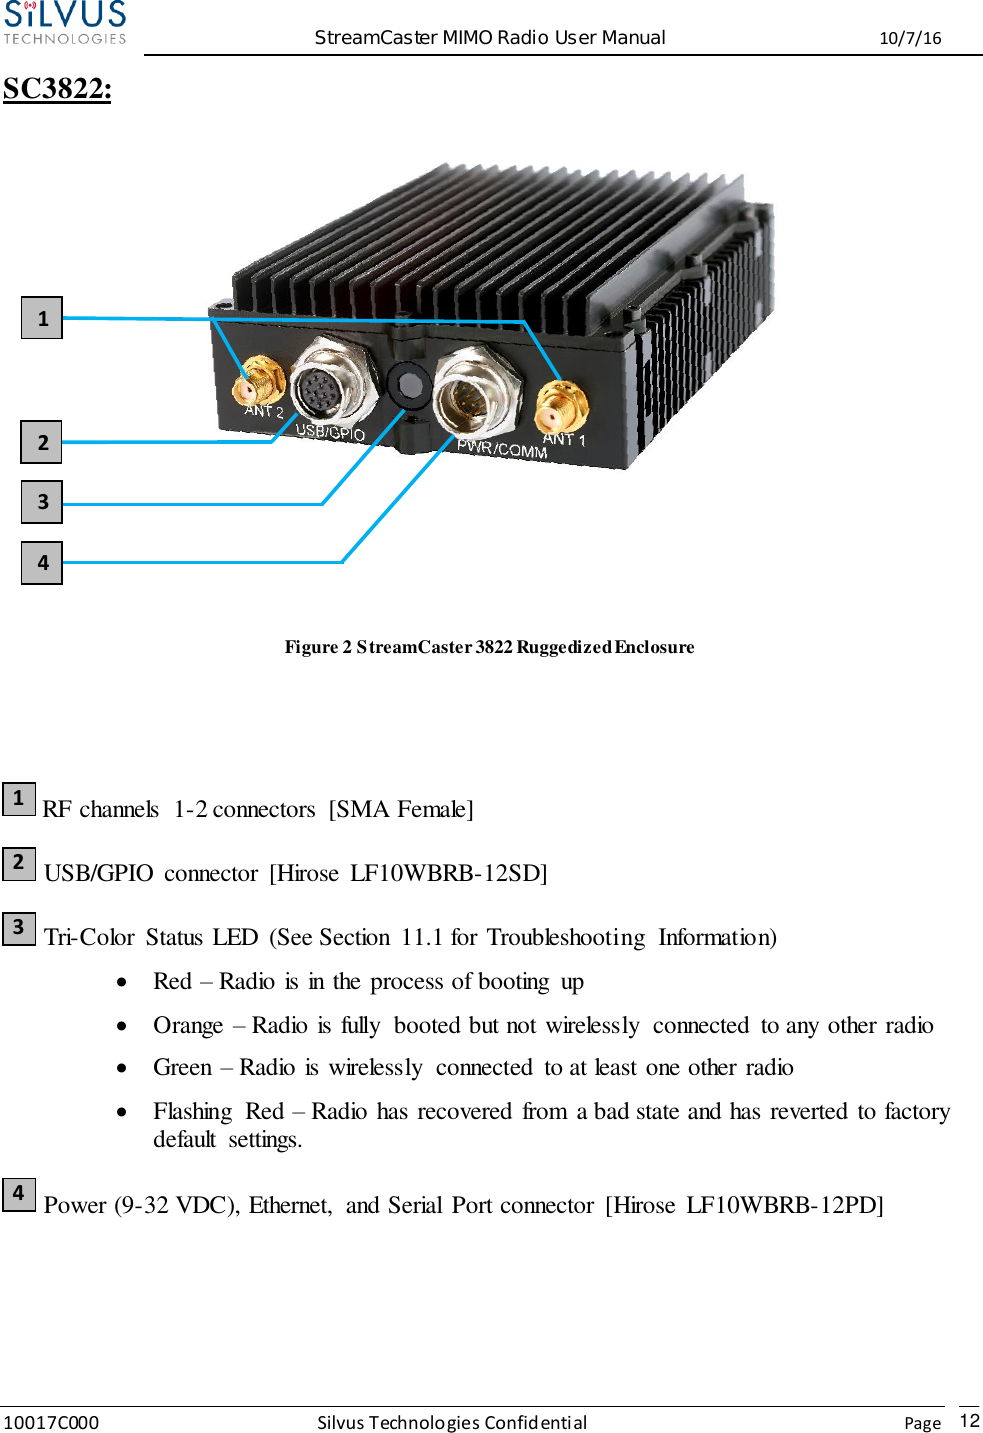  StreamCaster MIMO Radio User Manual  10/7/16 10017C000 Silvus Technologies Confidential    Page   12 SC3822:     Figure 2 StreamCaster 3822 Ruggedized Enclosure    RF channels  1-2 connectors  [SMA Female]  USB/GPIO connector  [Hirose  LF10WBRB-12SD]  Tri-Color  Status LED  (See Section  11.1 for Troubleshooting  Information)  Red – Radio is in the process of booting  up  Orange – Radio is fully  booted but not wirelessly  connected  to any other radio  Green – Radio is wirelessly  connected  to at least one other radio  Flashing  Red – Radio has recovered from  a bad state and has reverted to factory default  settings.  Power (9-32 VDC), Ethernet,  and Serial  Port connector  [Hirose  LF10WBRB-12PD] 1 2 3 4 2 1 3 4 